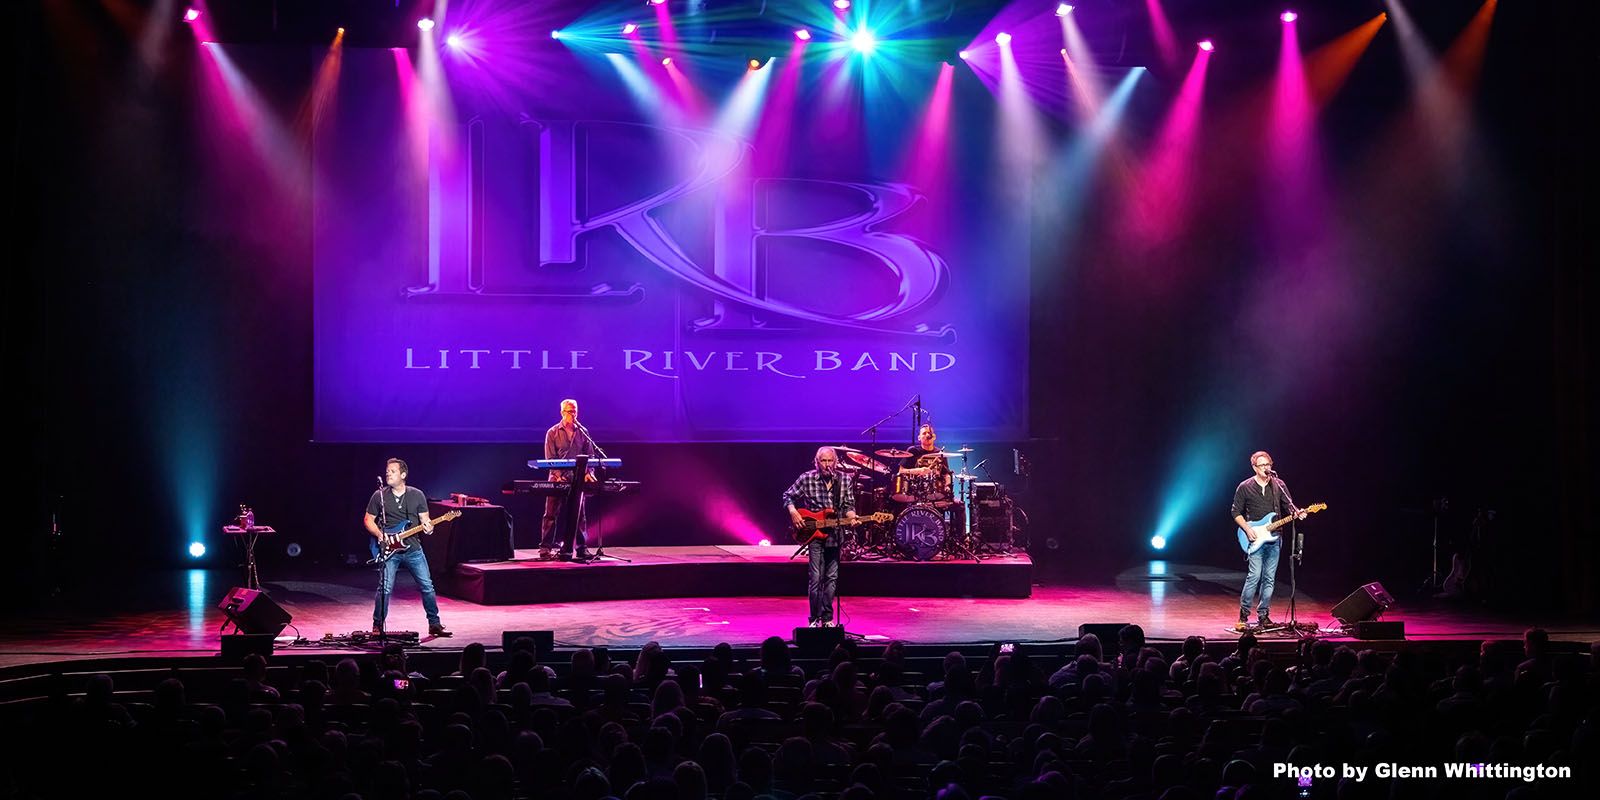 Soft rock legends Little River Band will be at Honeywell Center in Wabash on Friday, Feb. 2.